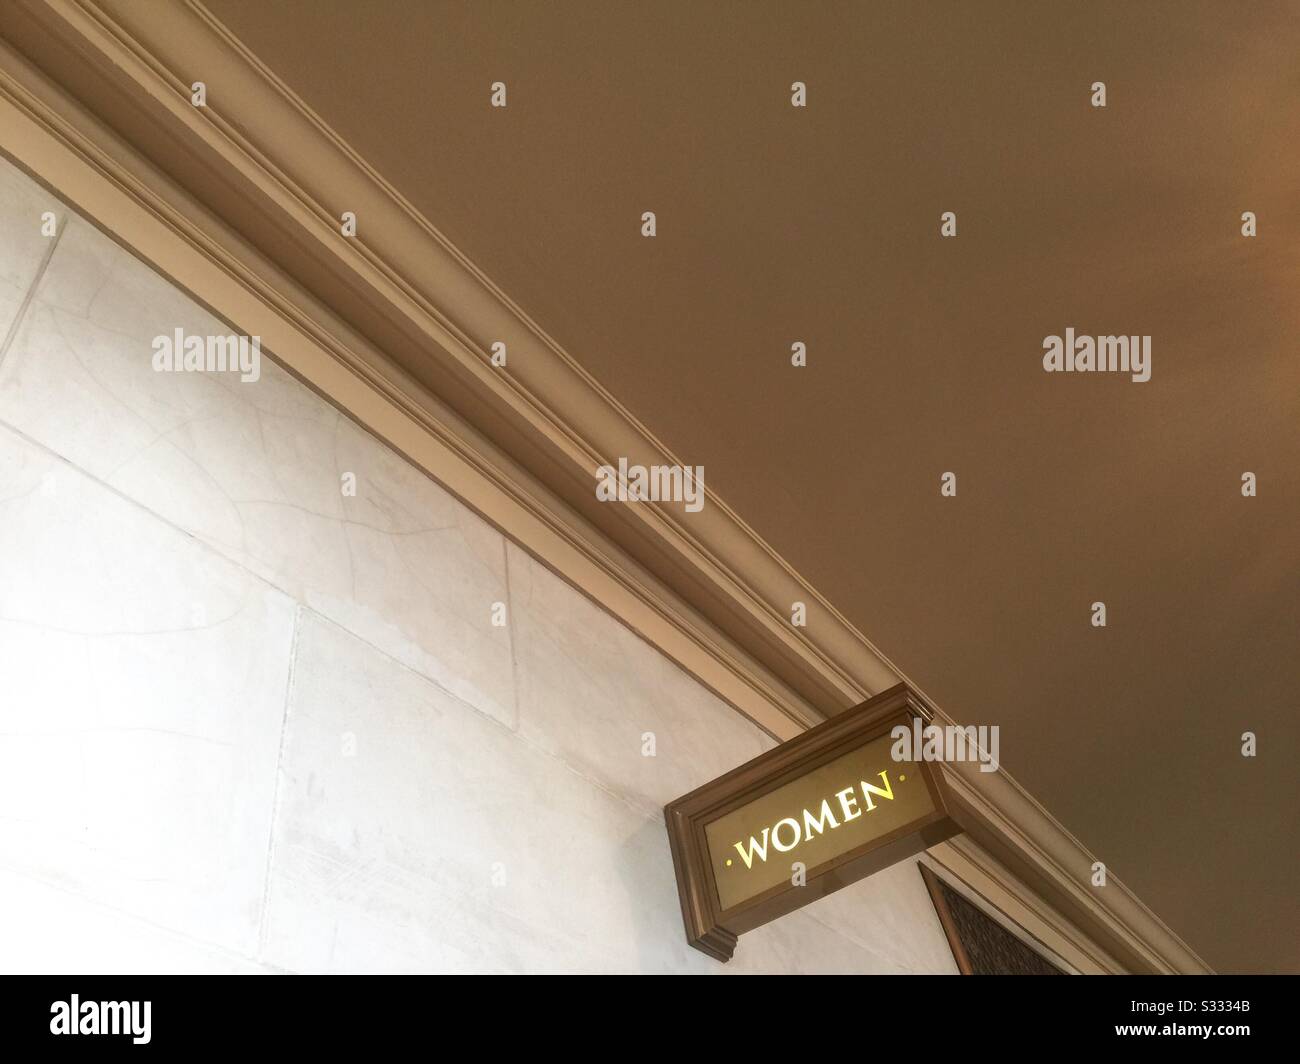 Women’s restroom sign attached to a marble wall at the elegant San Francisco Memorial Opera House. Stock Photo